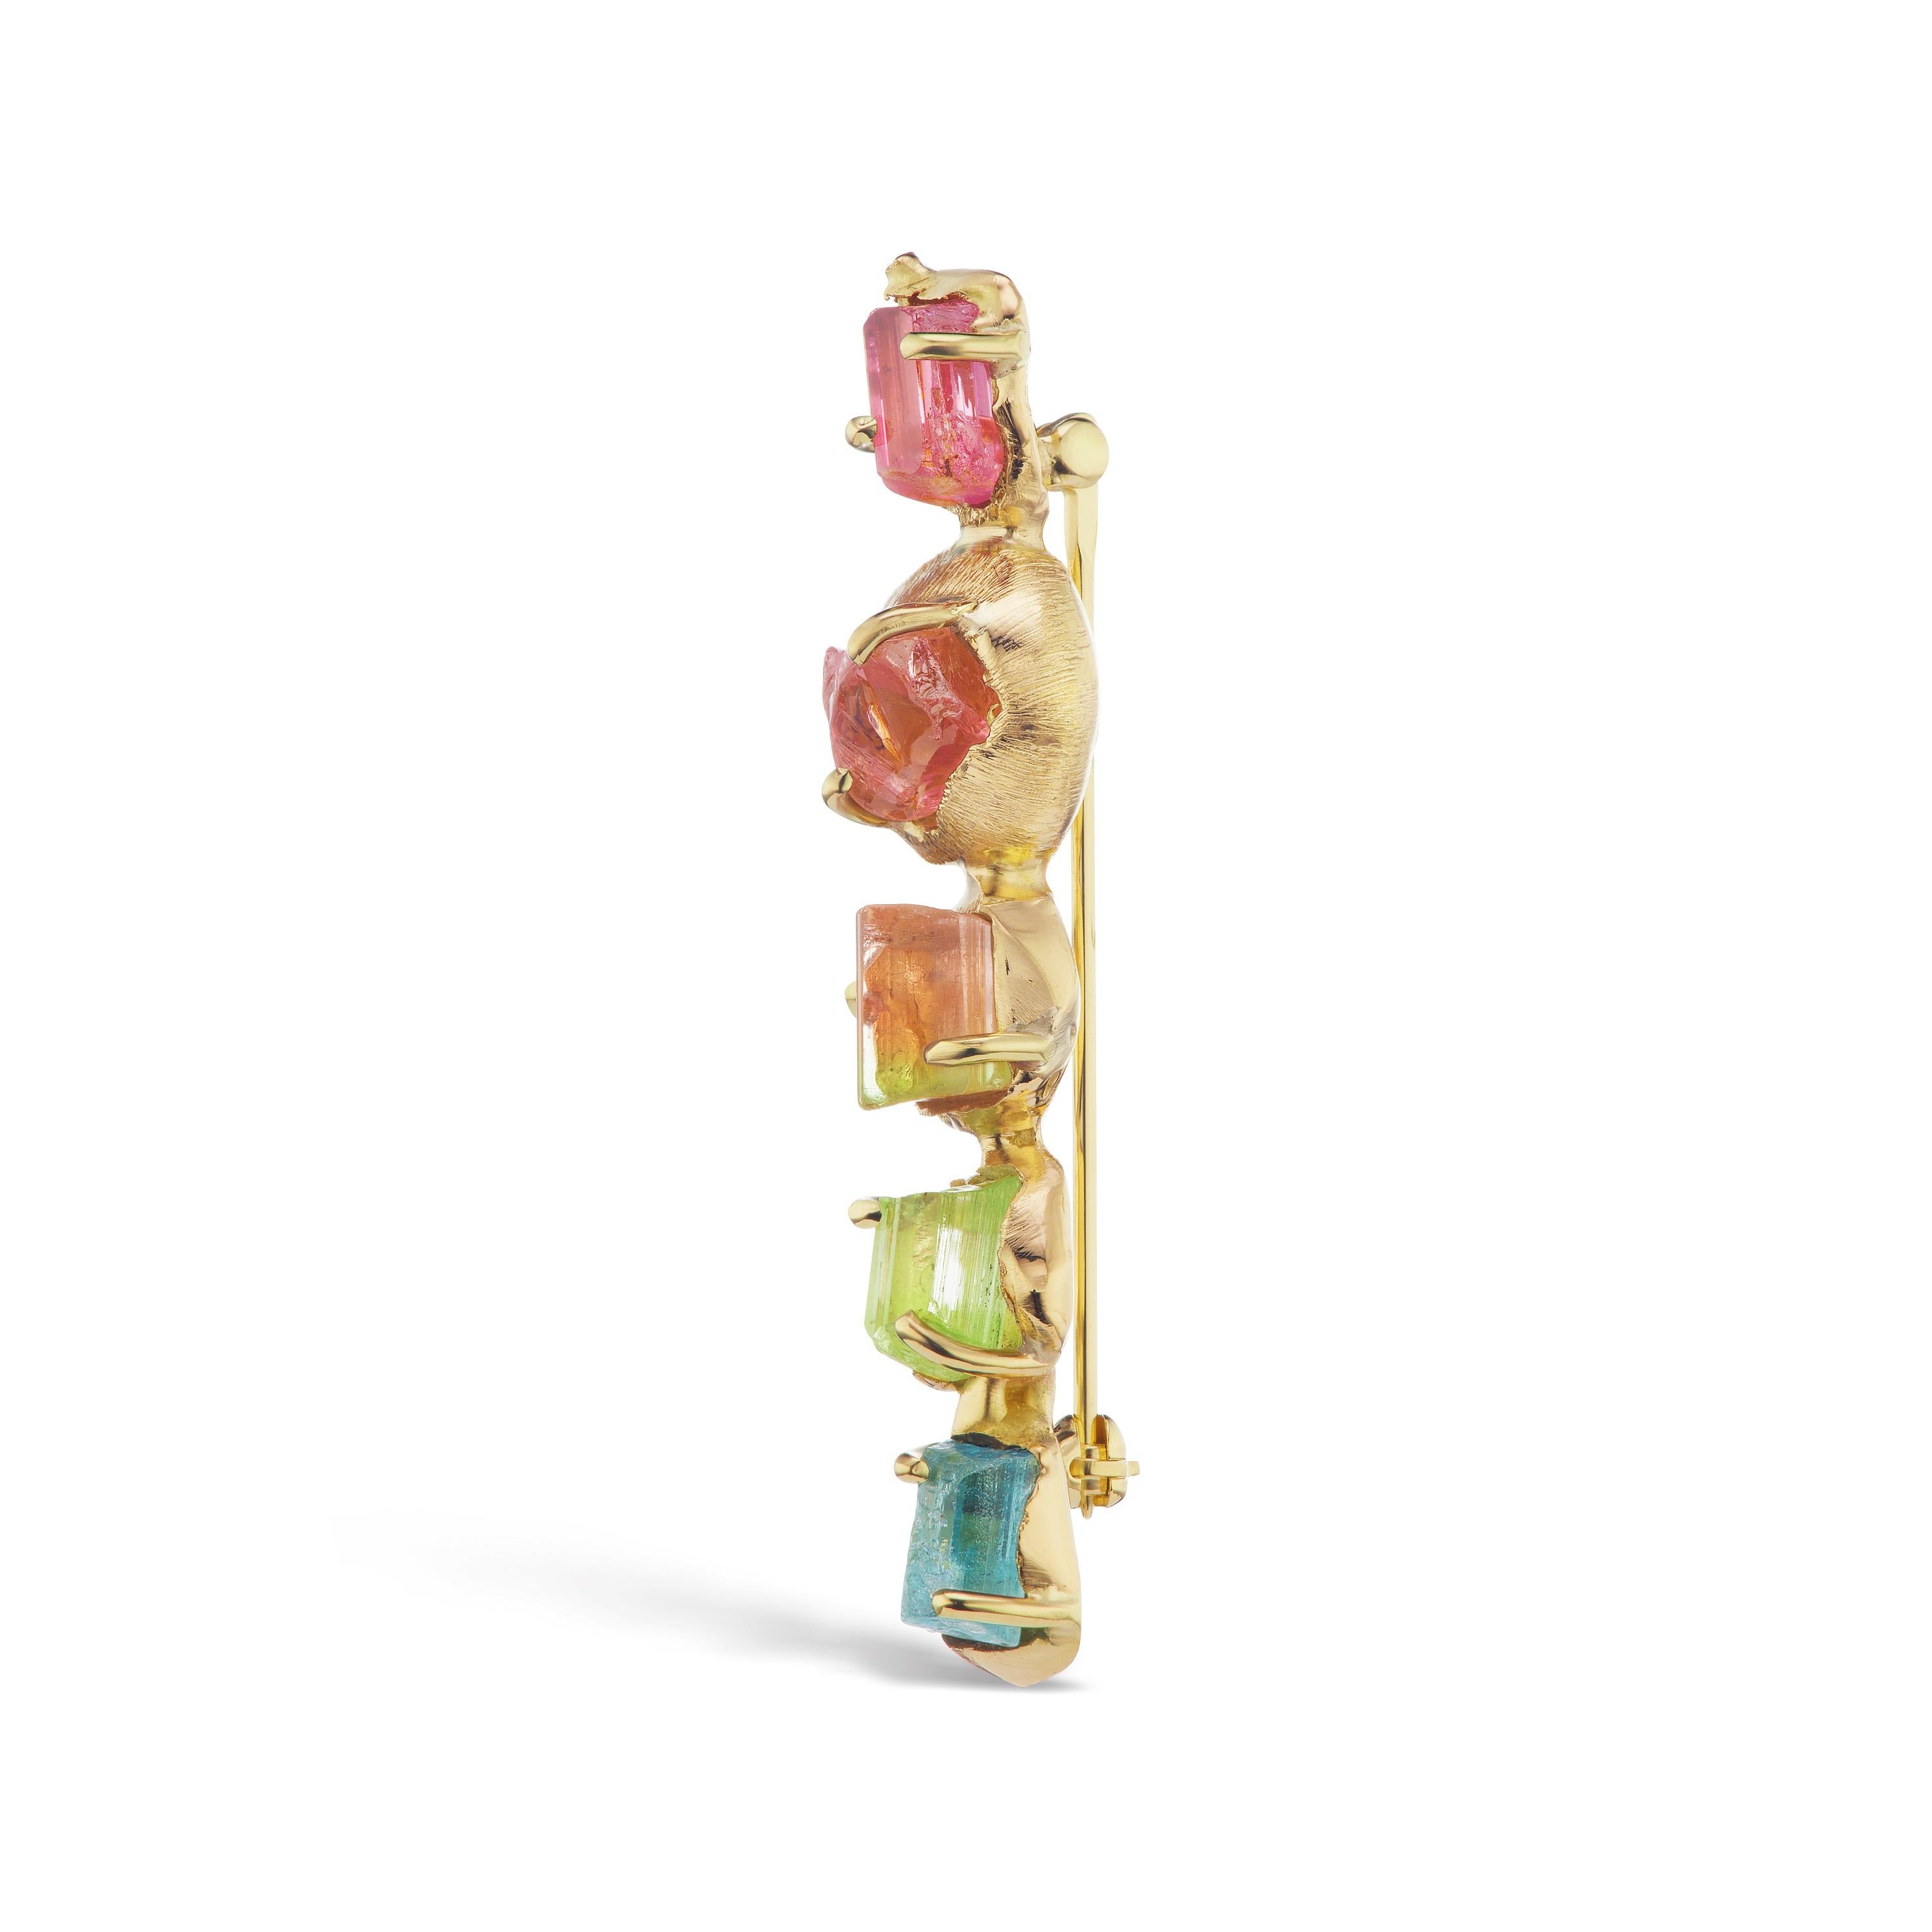 The one-of-a-kind Tsavo Sunphase lapel pin is hand-crafted in 18-karat recycled yellow gold, and showcases five untreated, Tenda Cut, natural color tourmaline in shades of pink, peach, green, and blue. The tourmalines are set in a linear row, in a